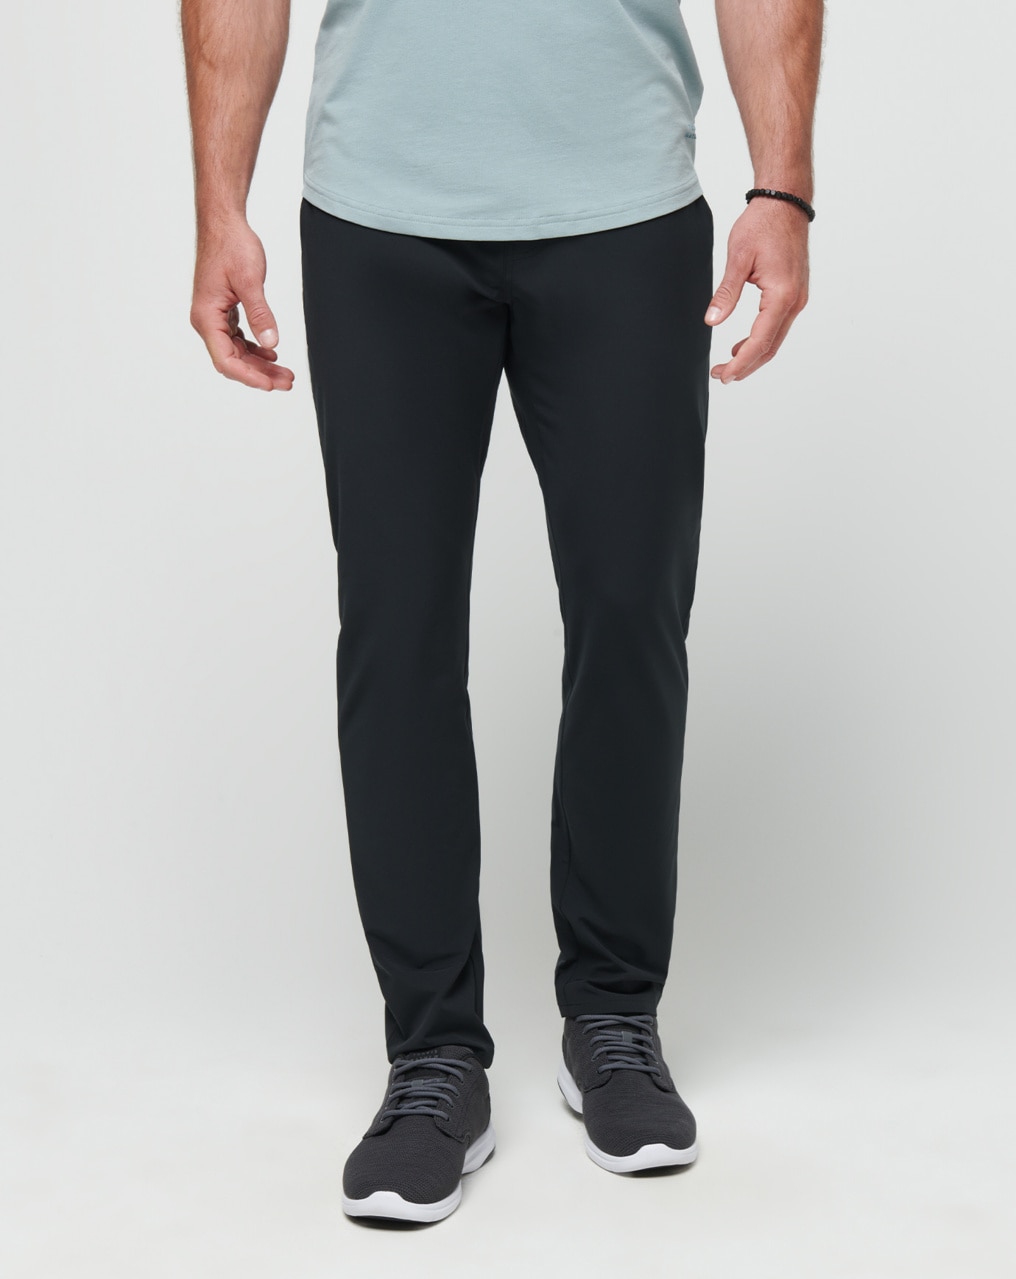 Championship Chinos Bring Tear-Away Pants To Casual Wear